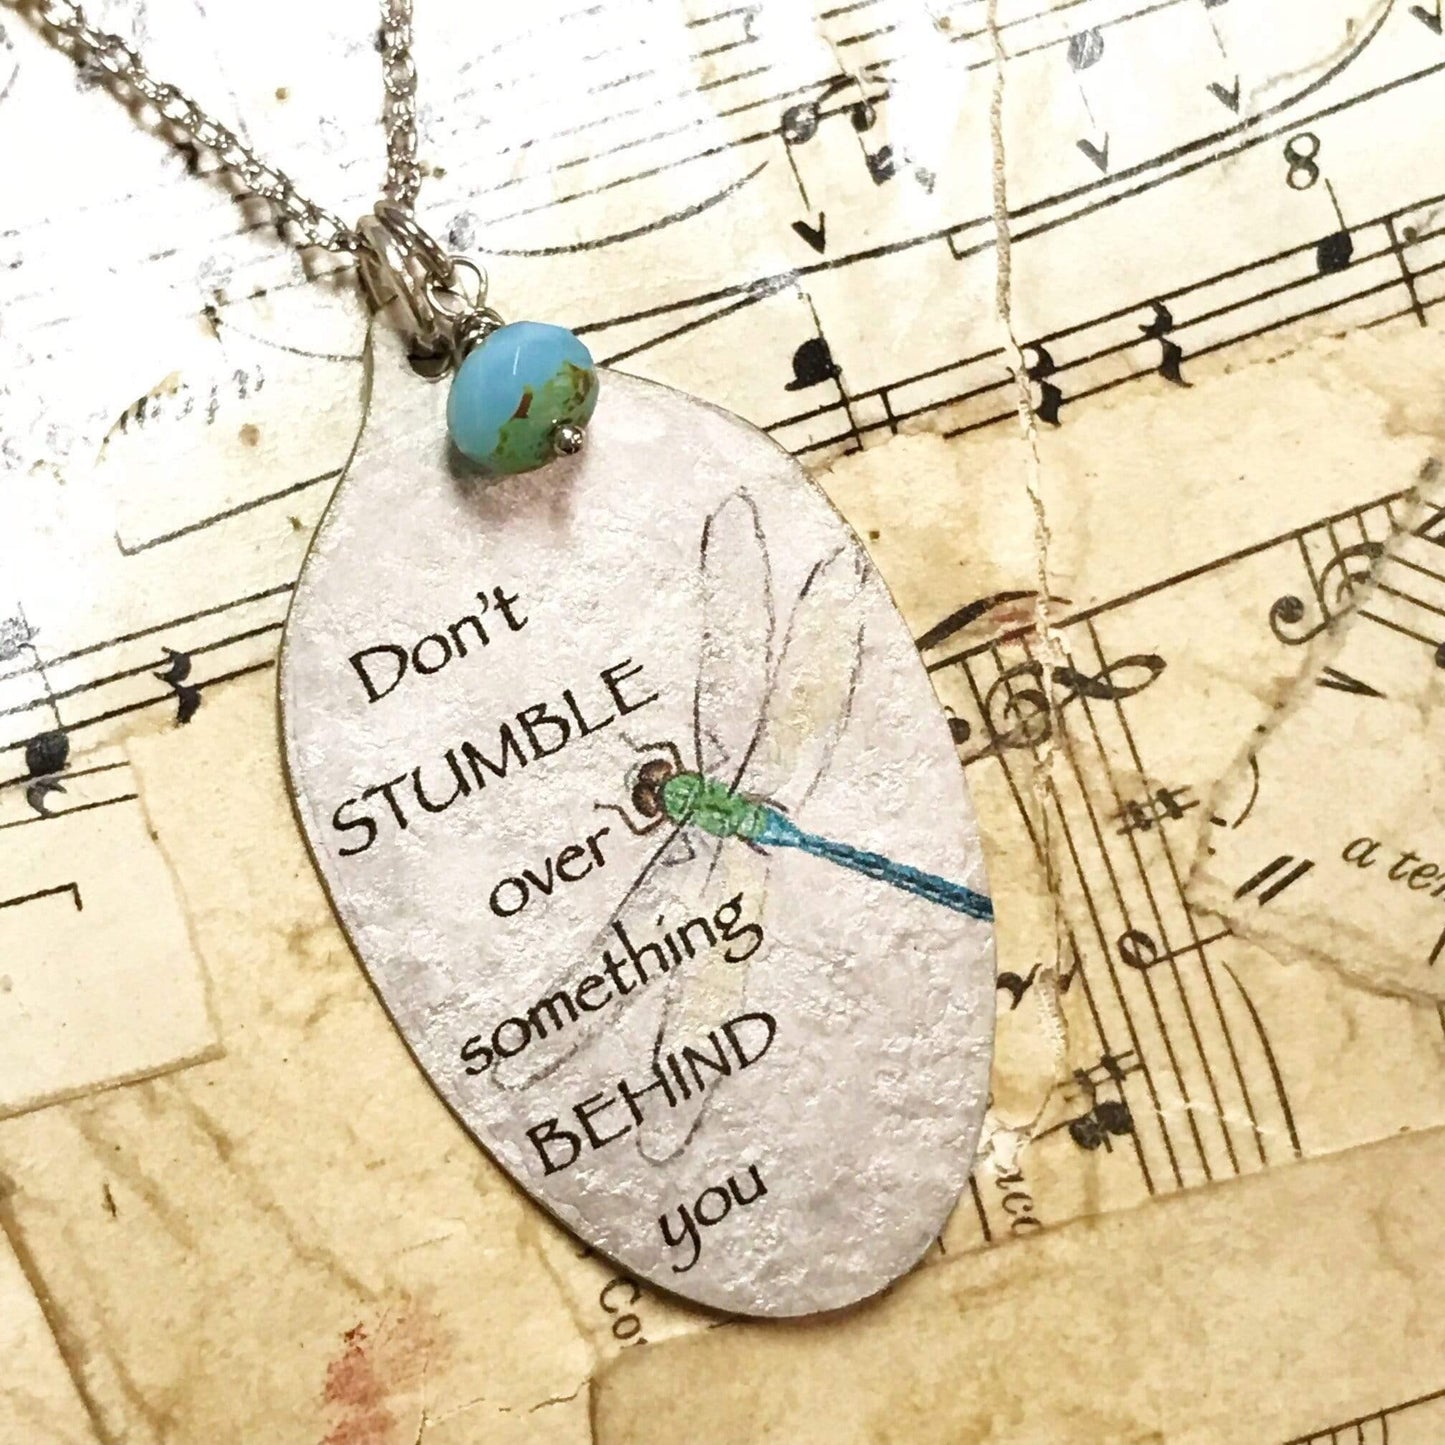 Don't Stumble Over Something Behind You Necklace - Inspiring Spoon Jewelry - KyleeMae Designs